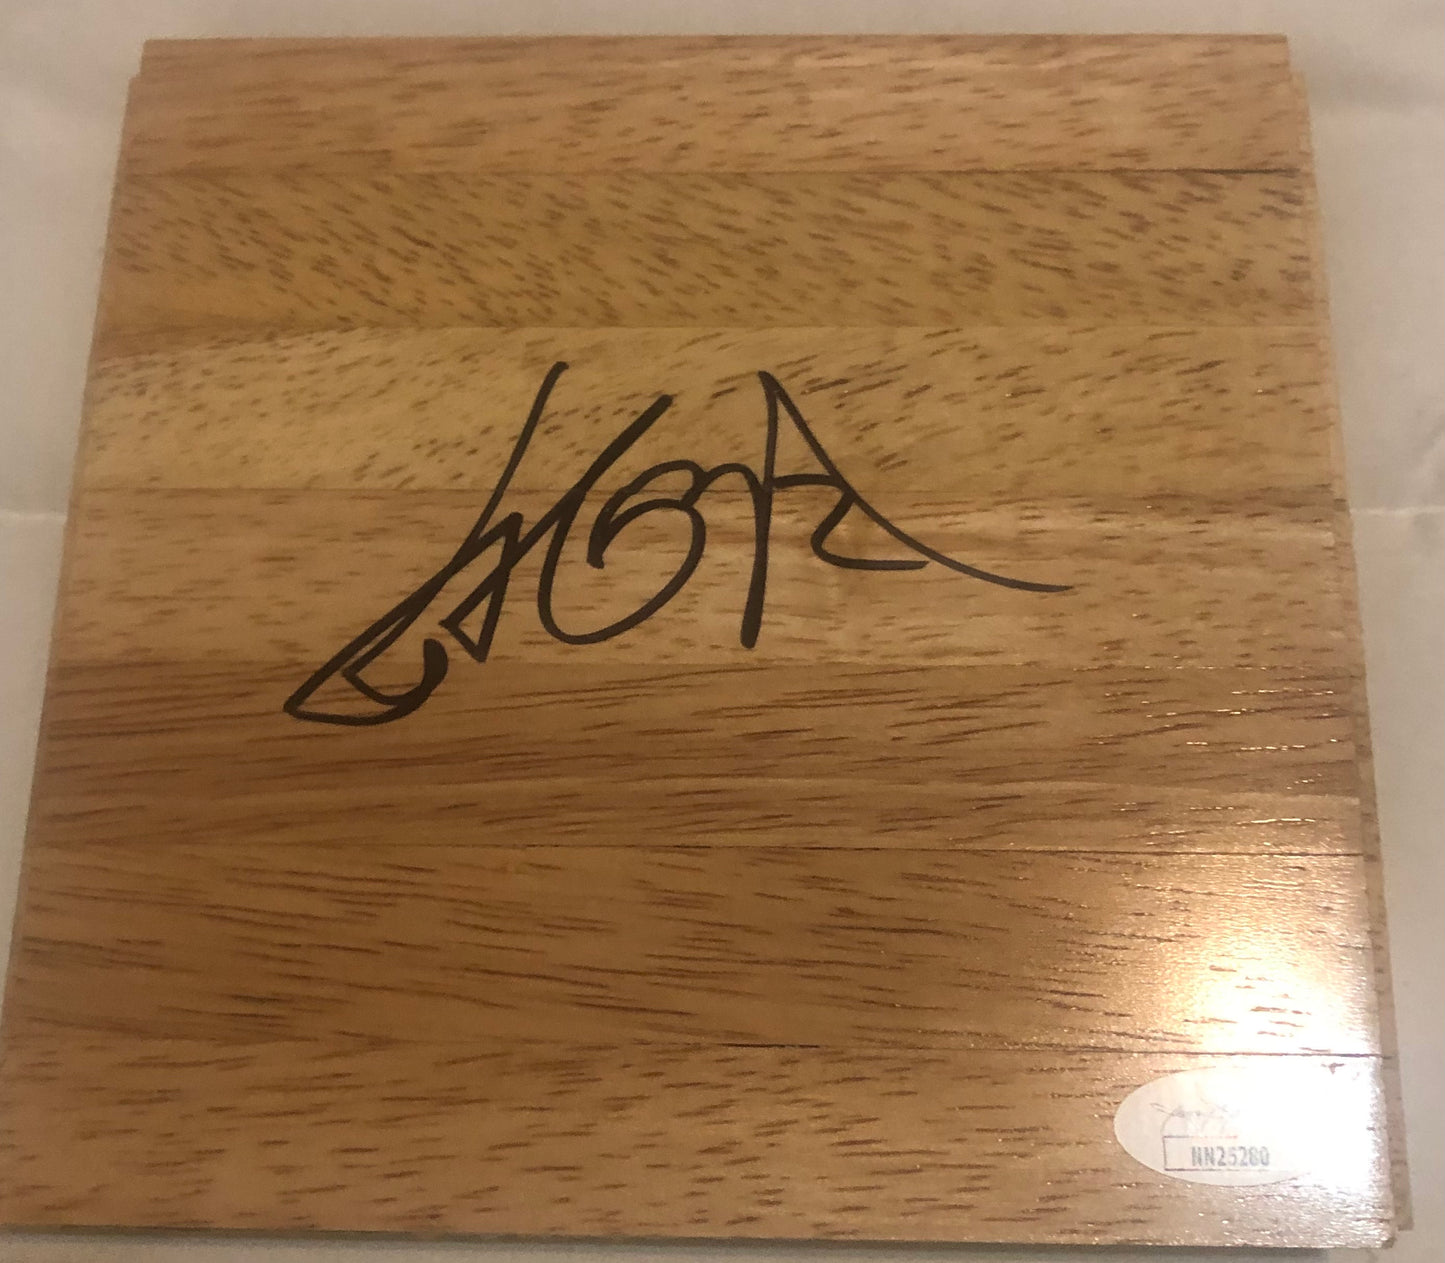 RARE Yao Ming signed 6x6 floor board with JSA certification